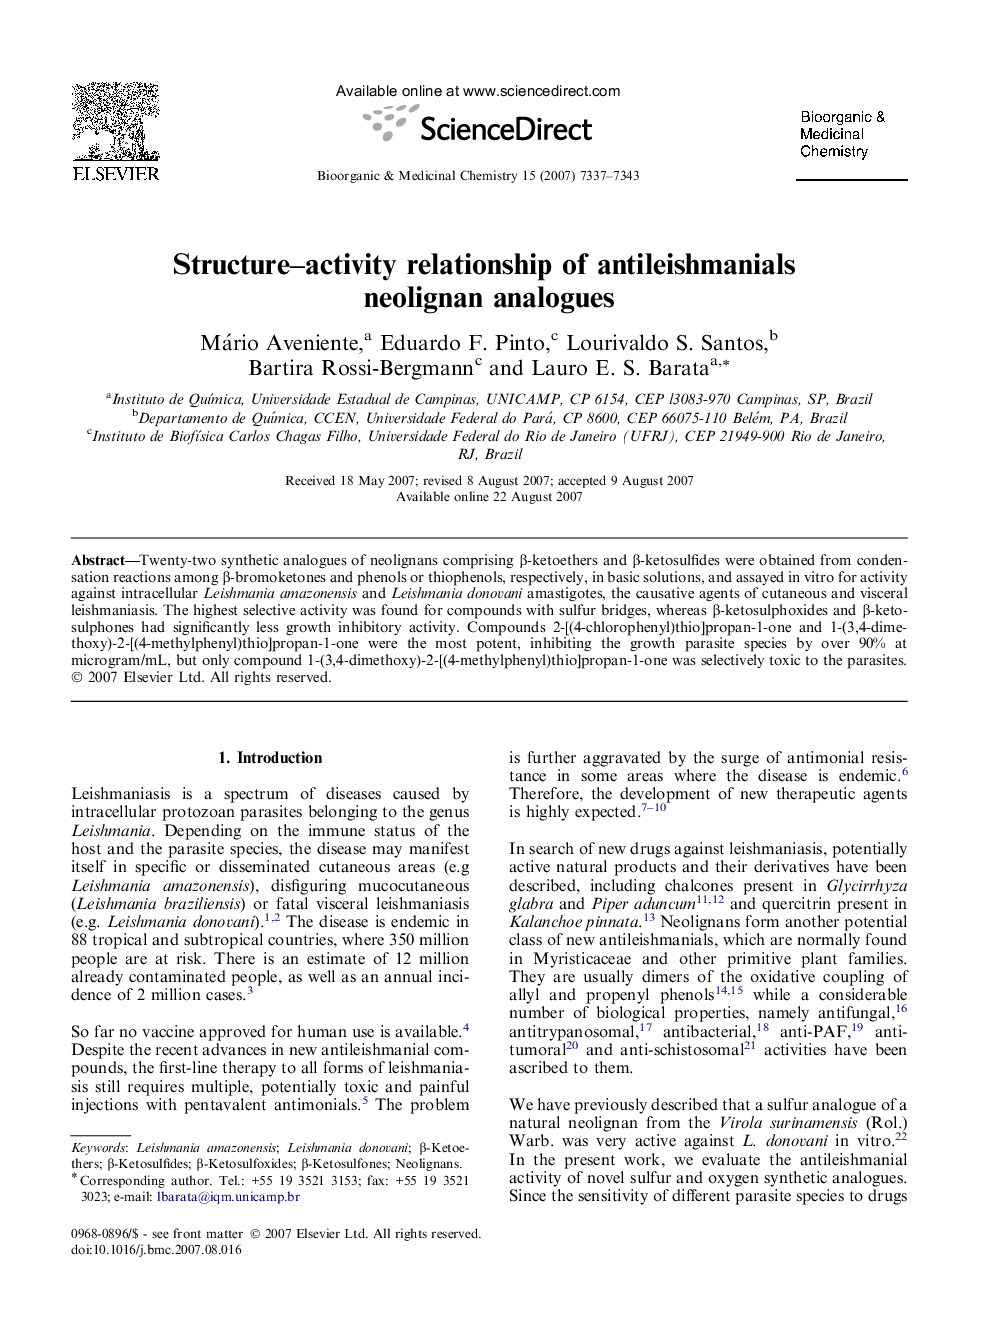 Structure-activity relationship of antileishmanials neolignan analogues